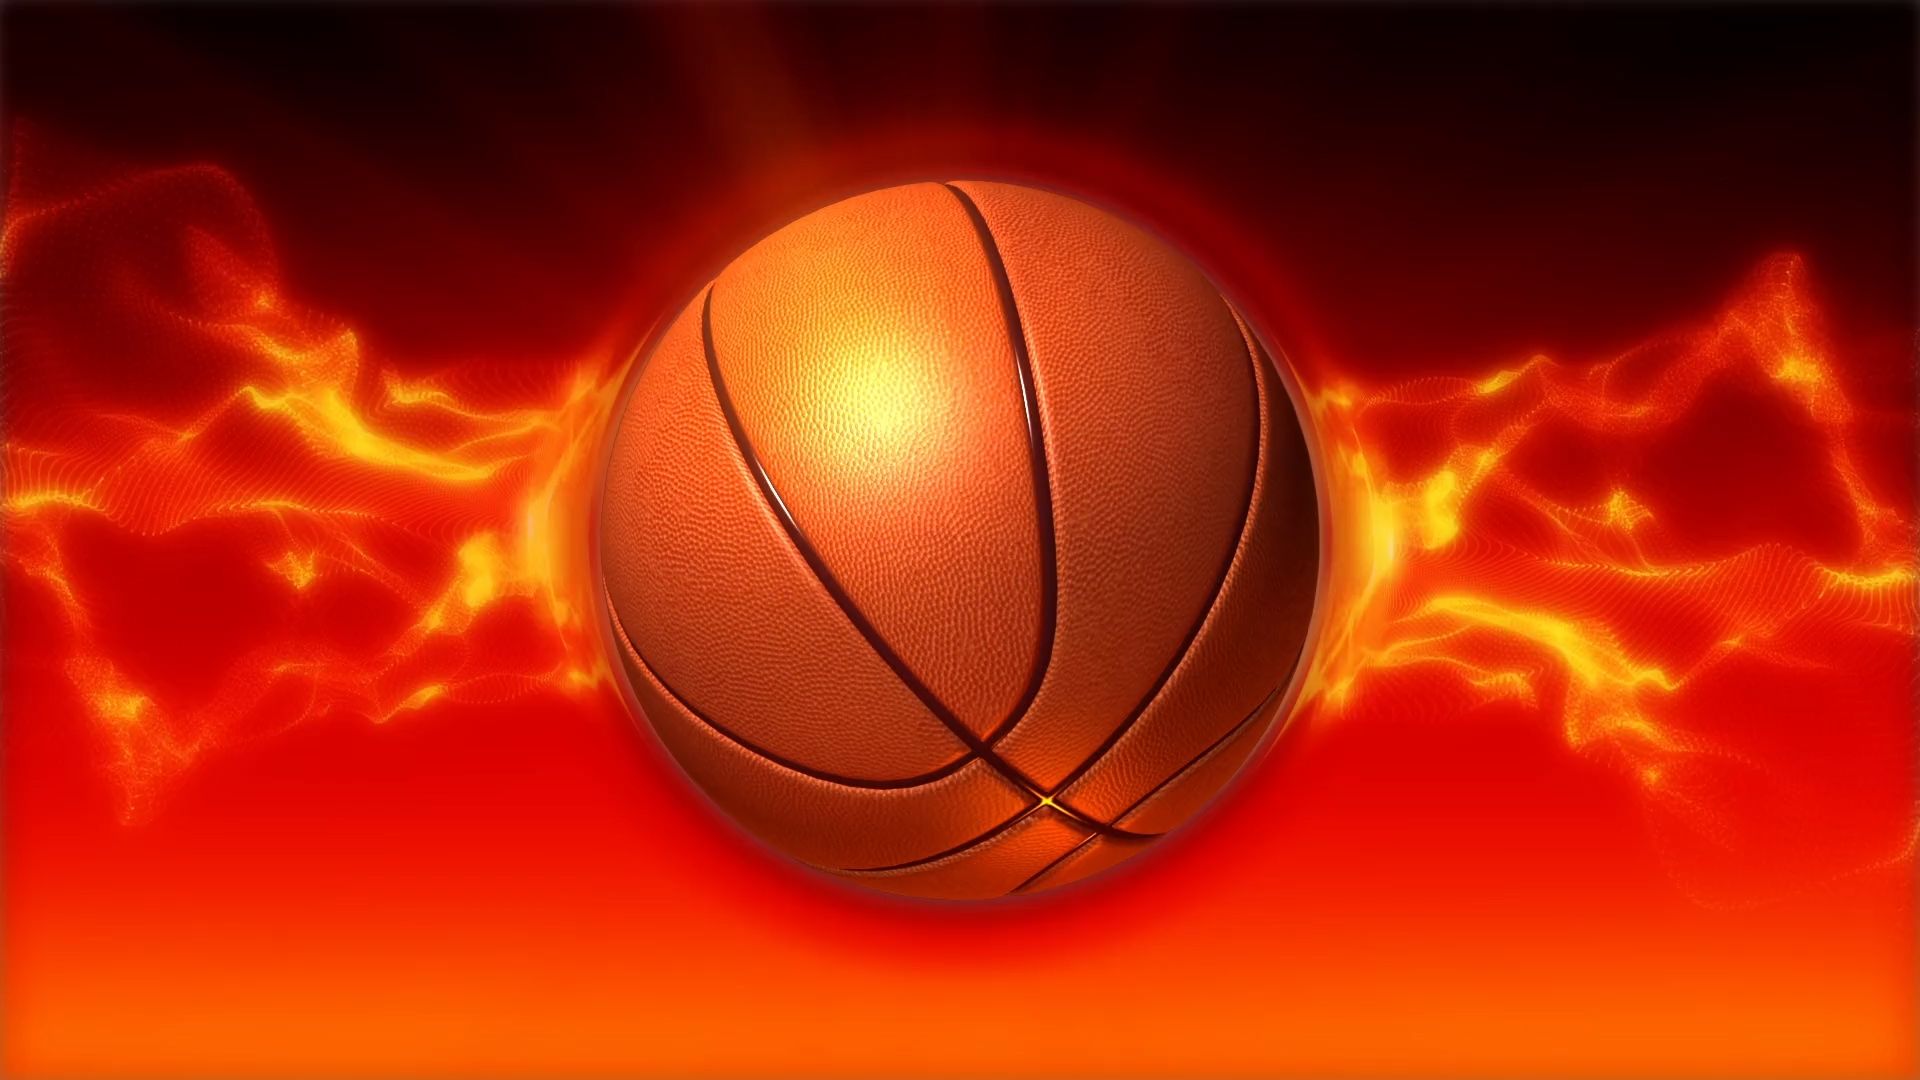 Basketball On Fire Wallpapers on WallpaperDog